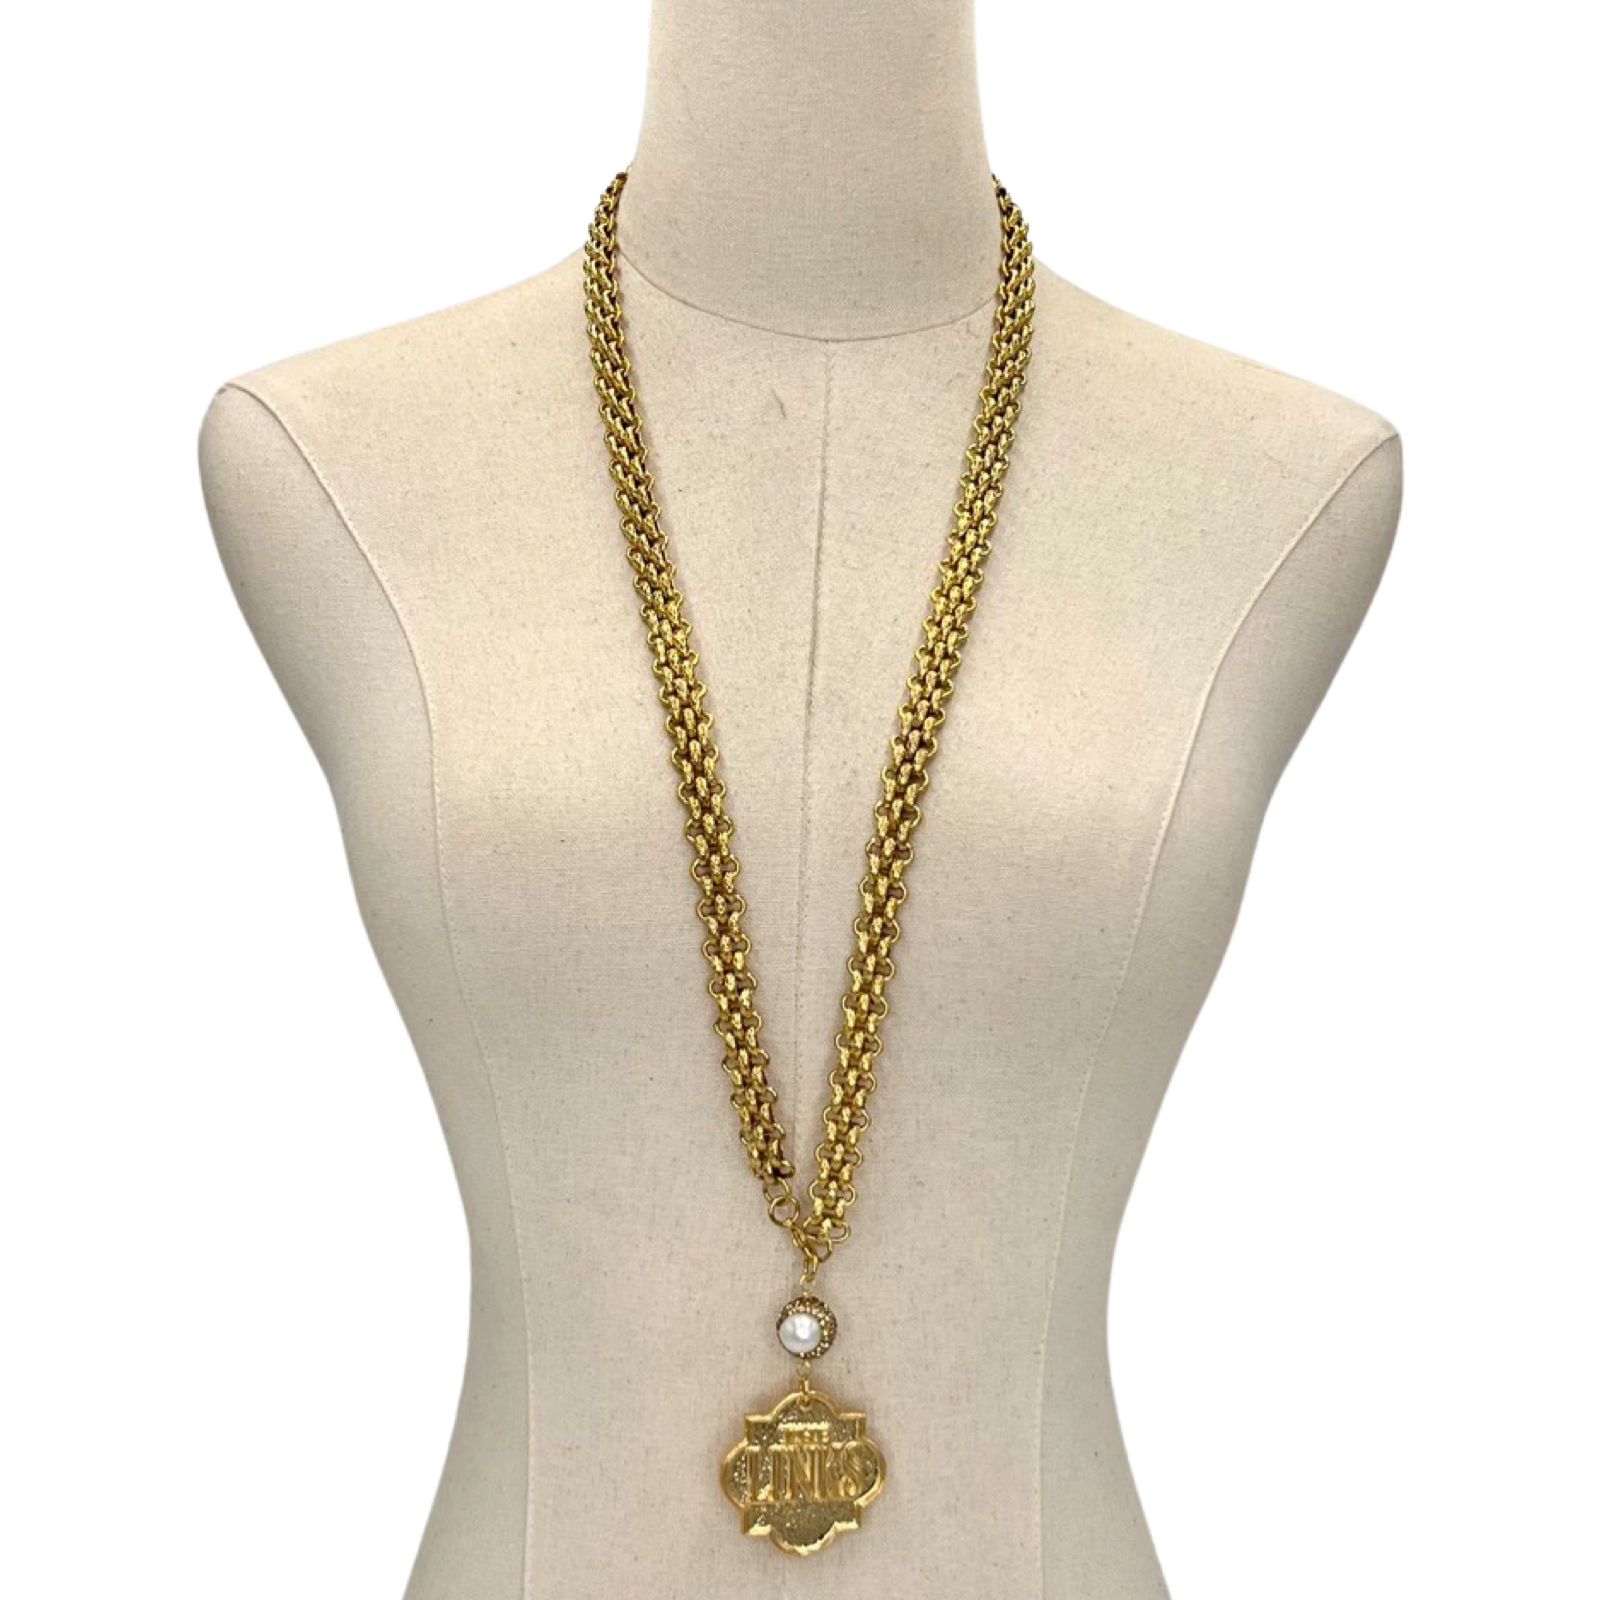 Links Vitri Chain Necklace